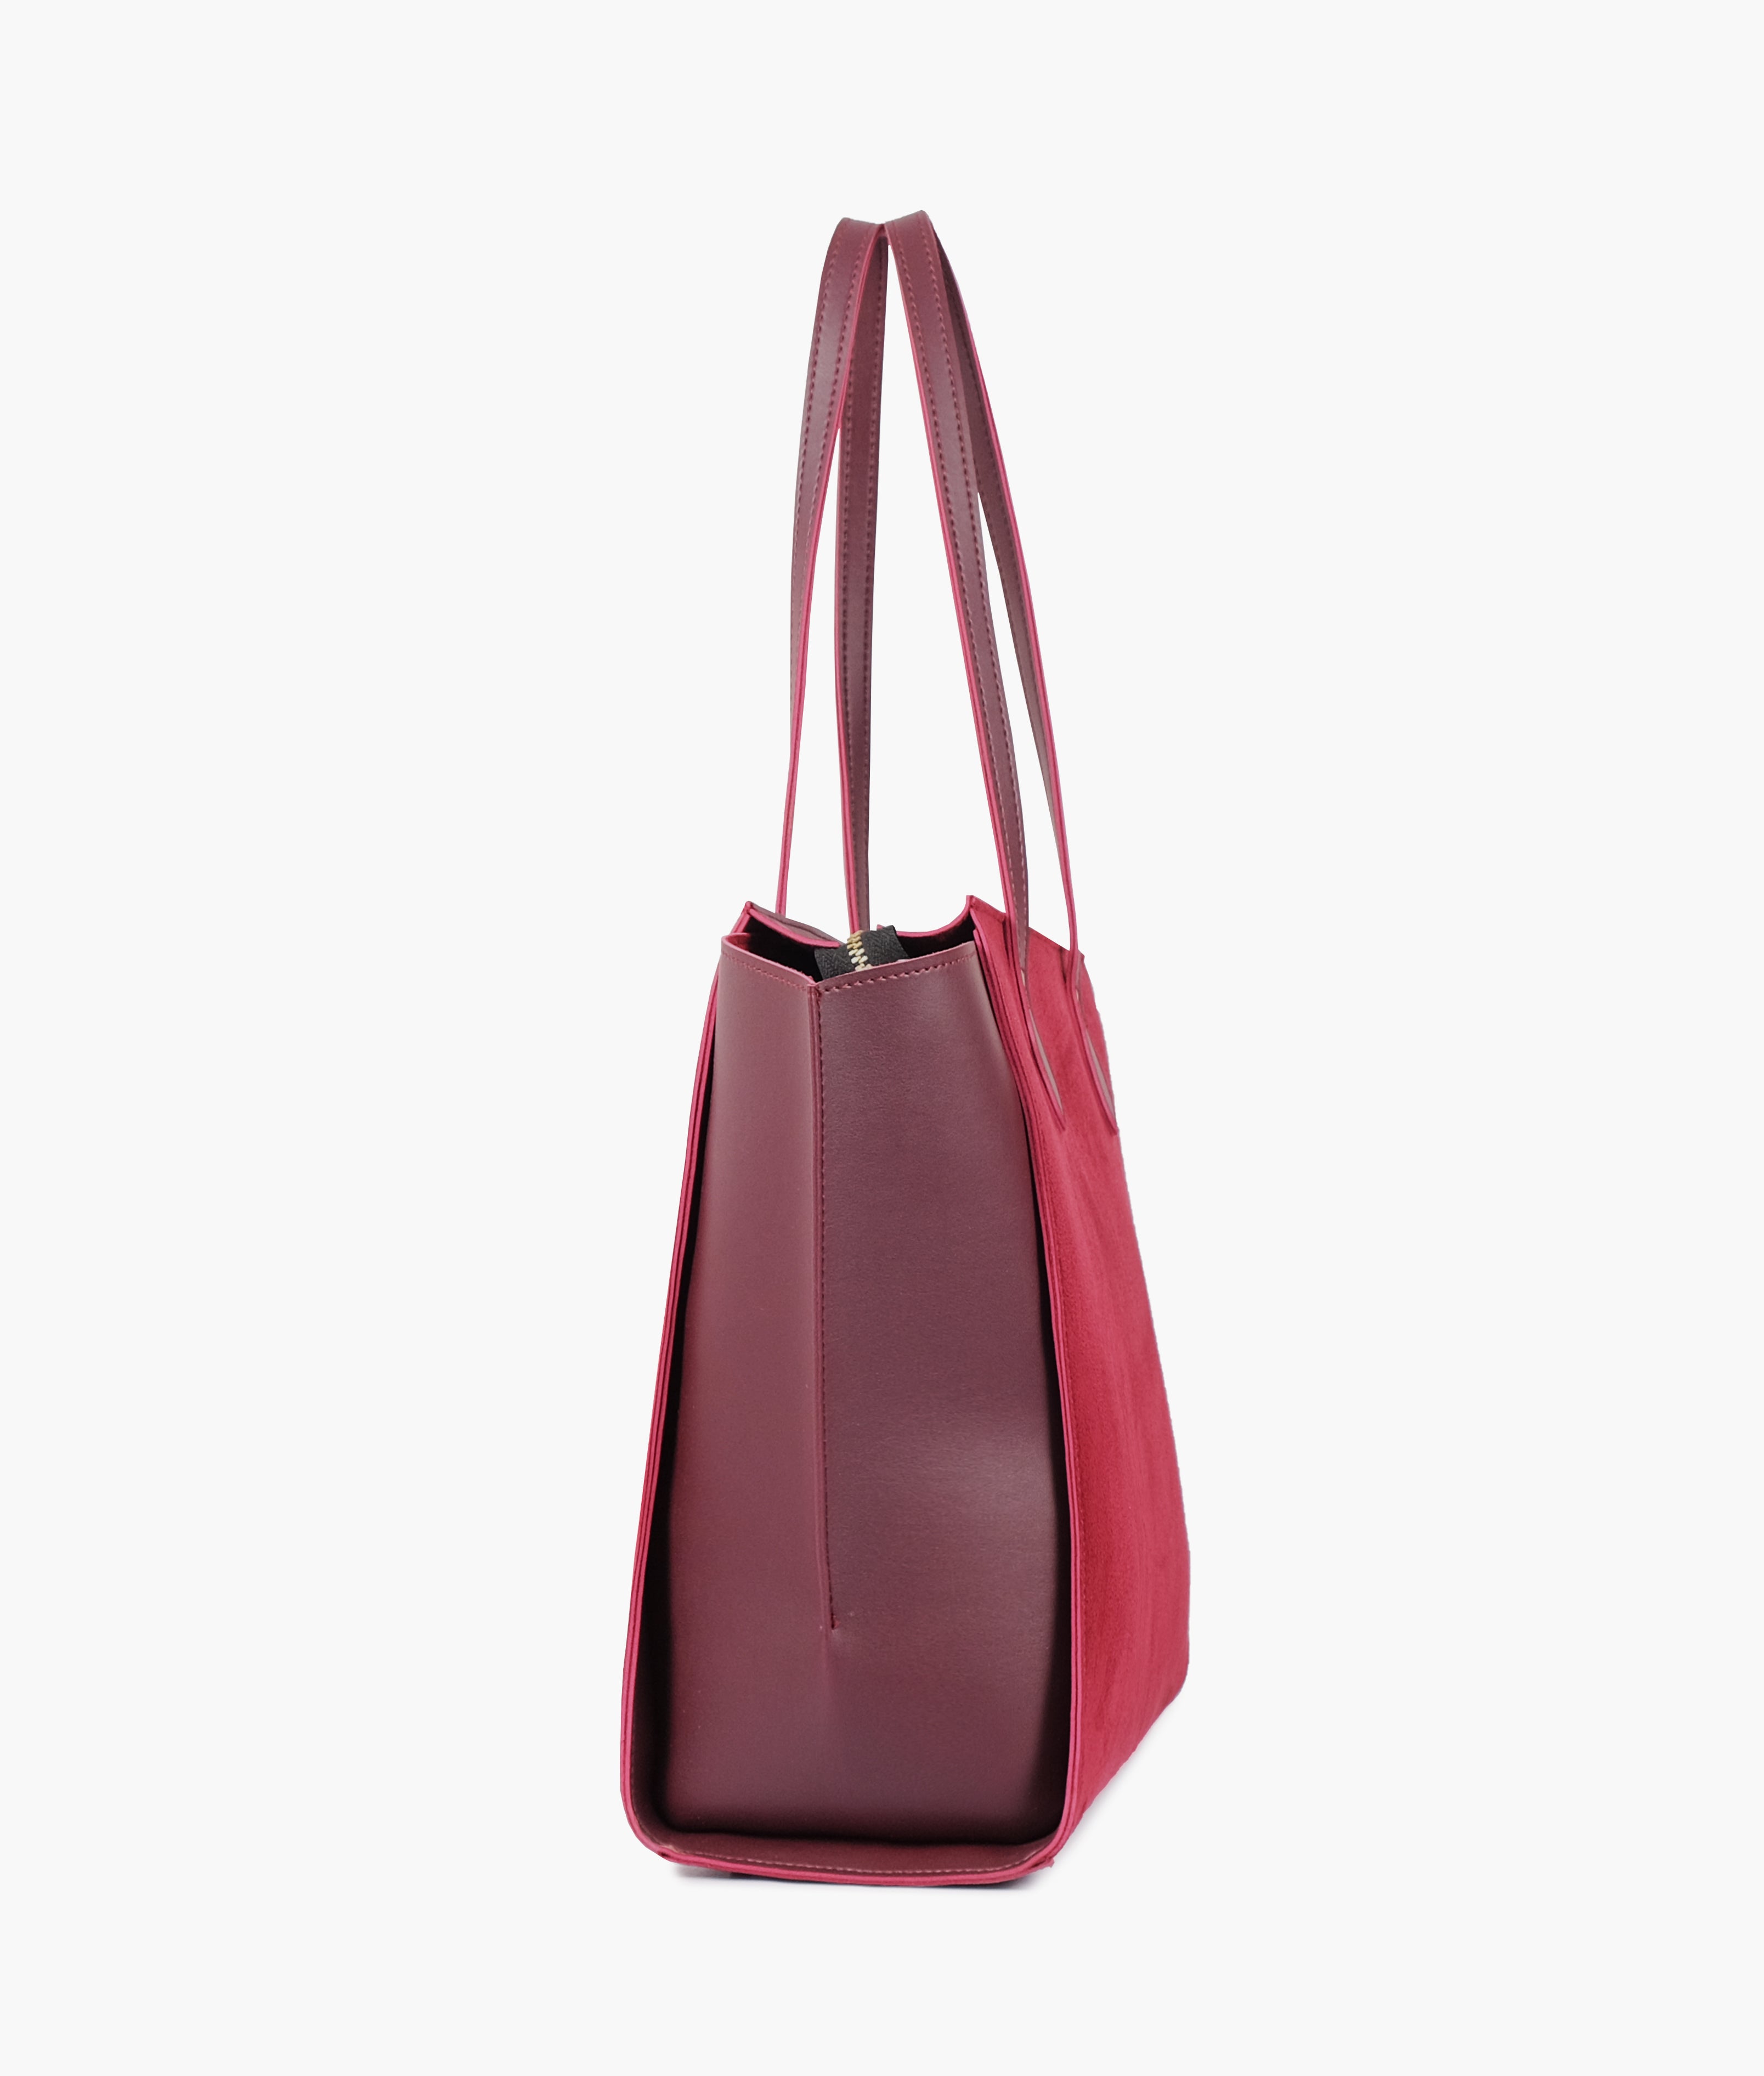 Burgundy suede classic tote bag